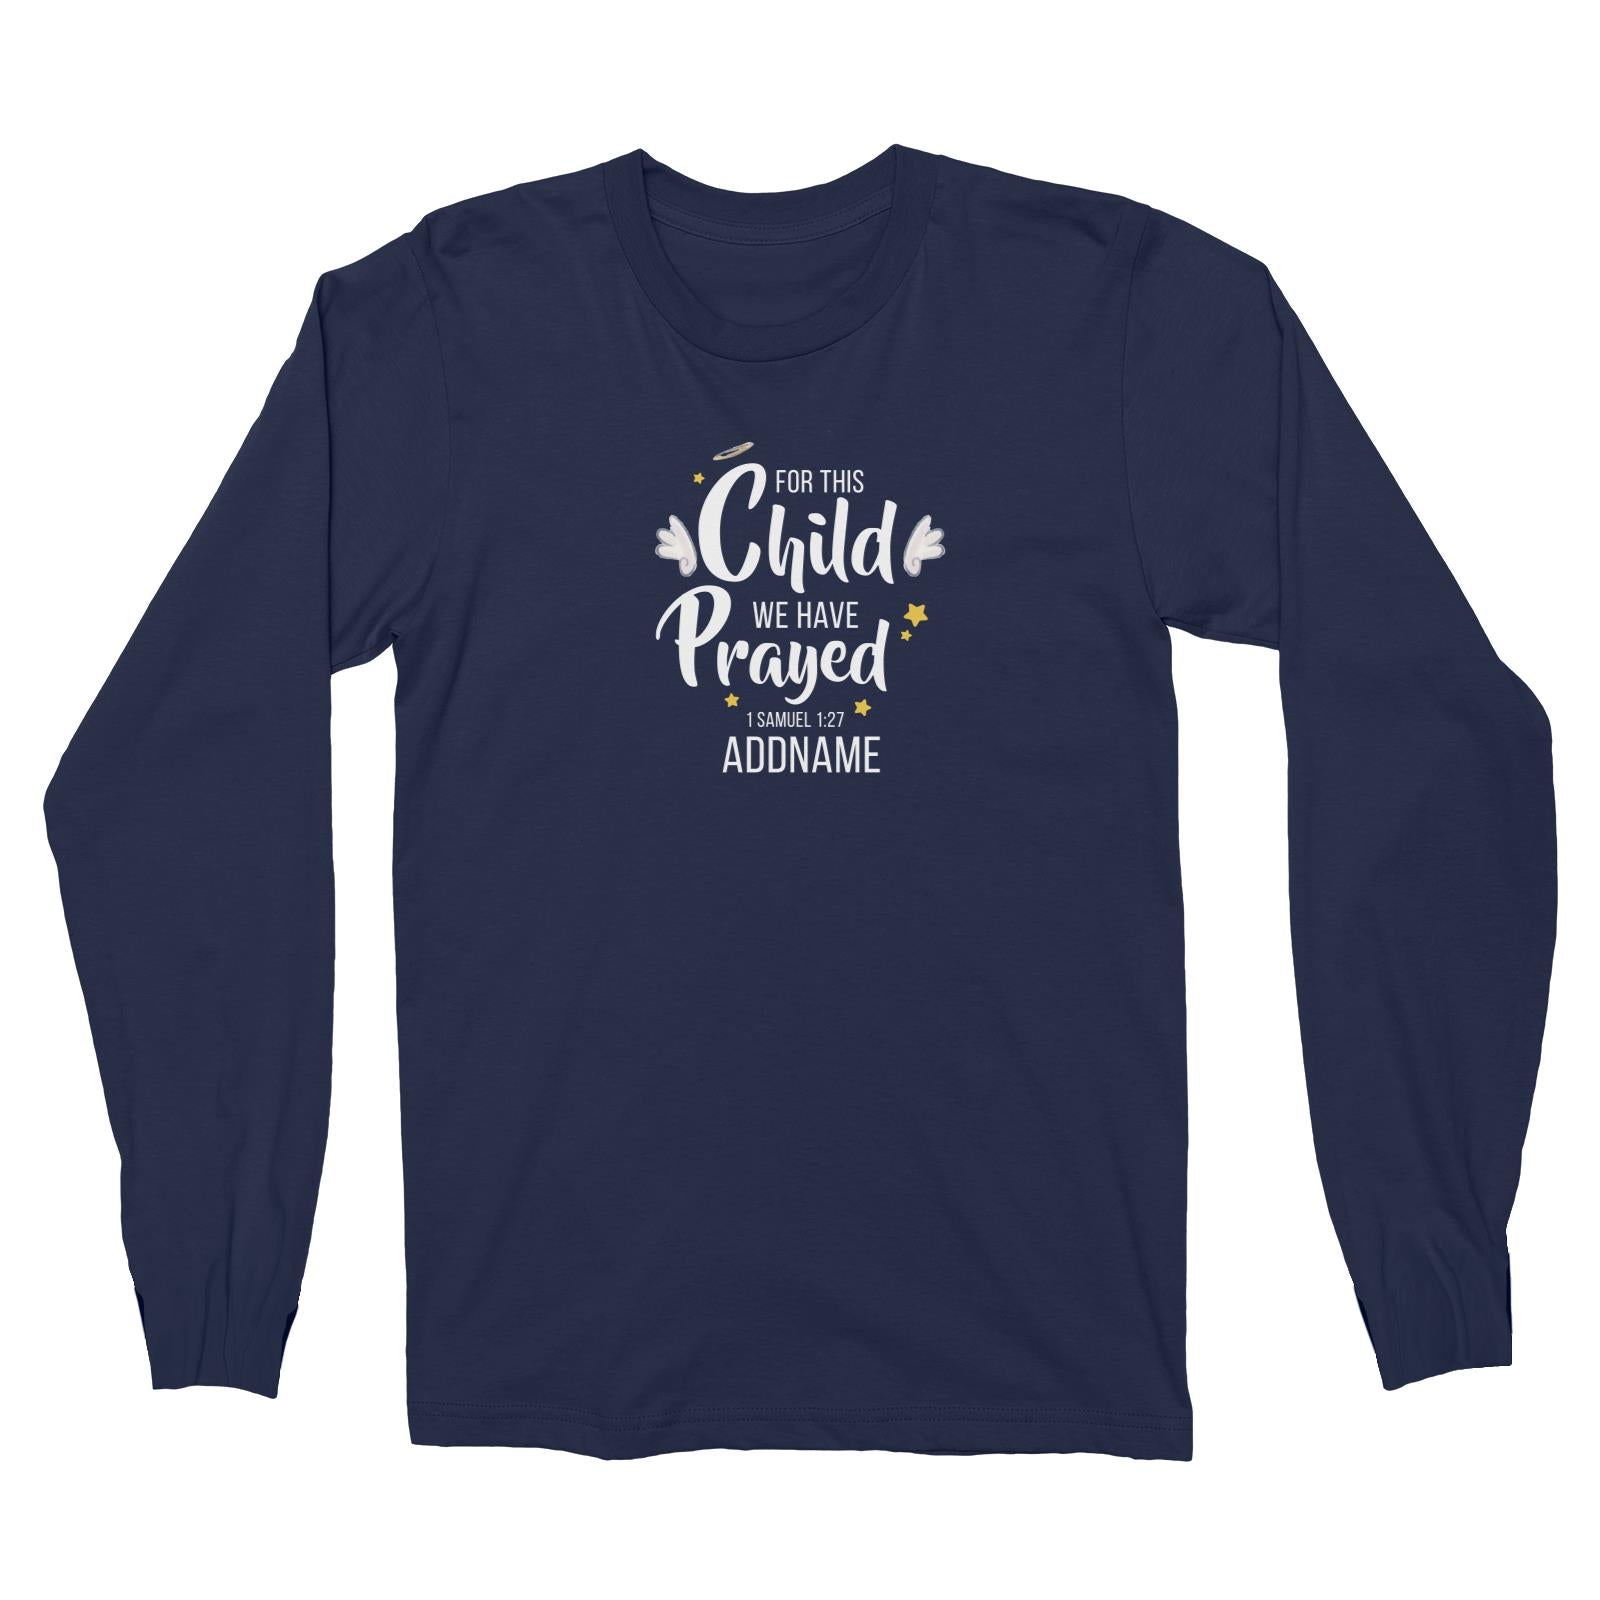 Gods Gift For This Child We Have Prayed 1 Samuel 1.27 Addname Long Sleeve Unisex T-Shirt